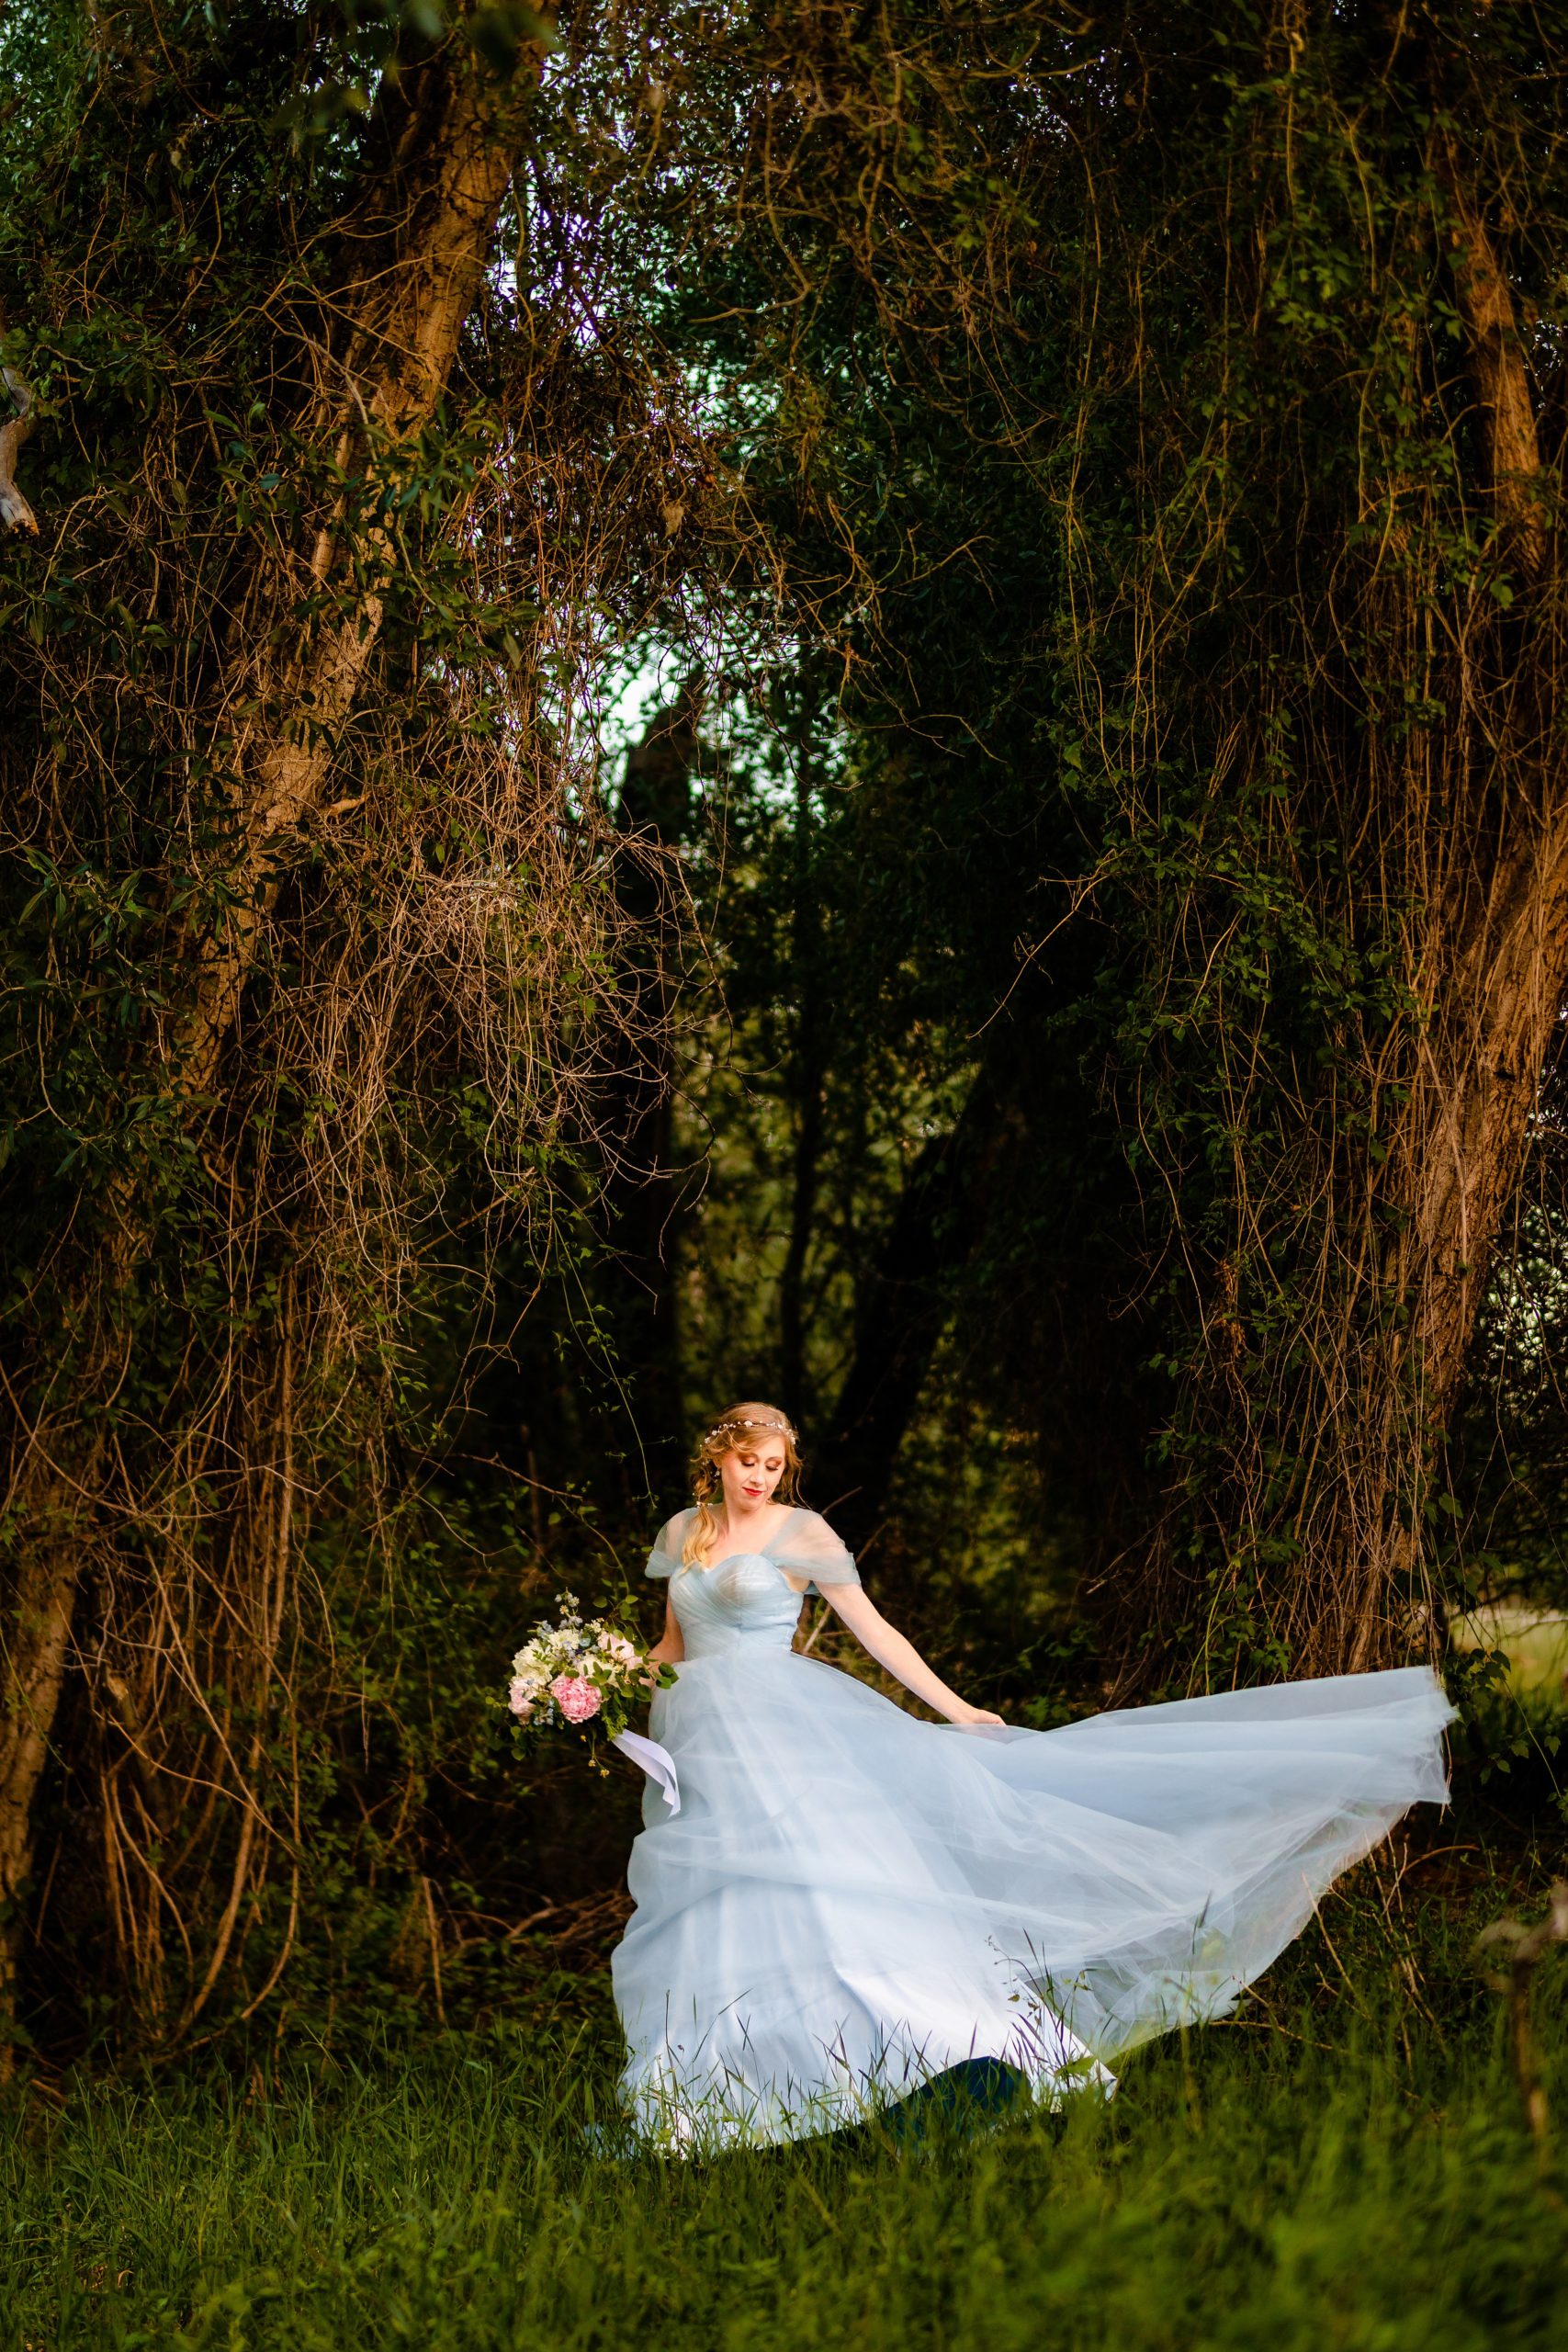 windy bride in blue dress standing along in forest with wind blowing dress